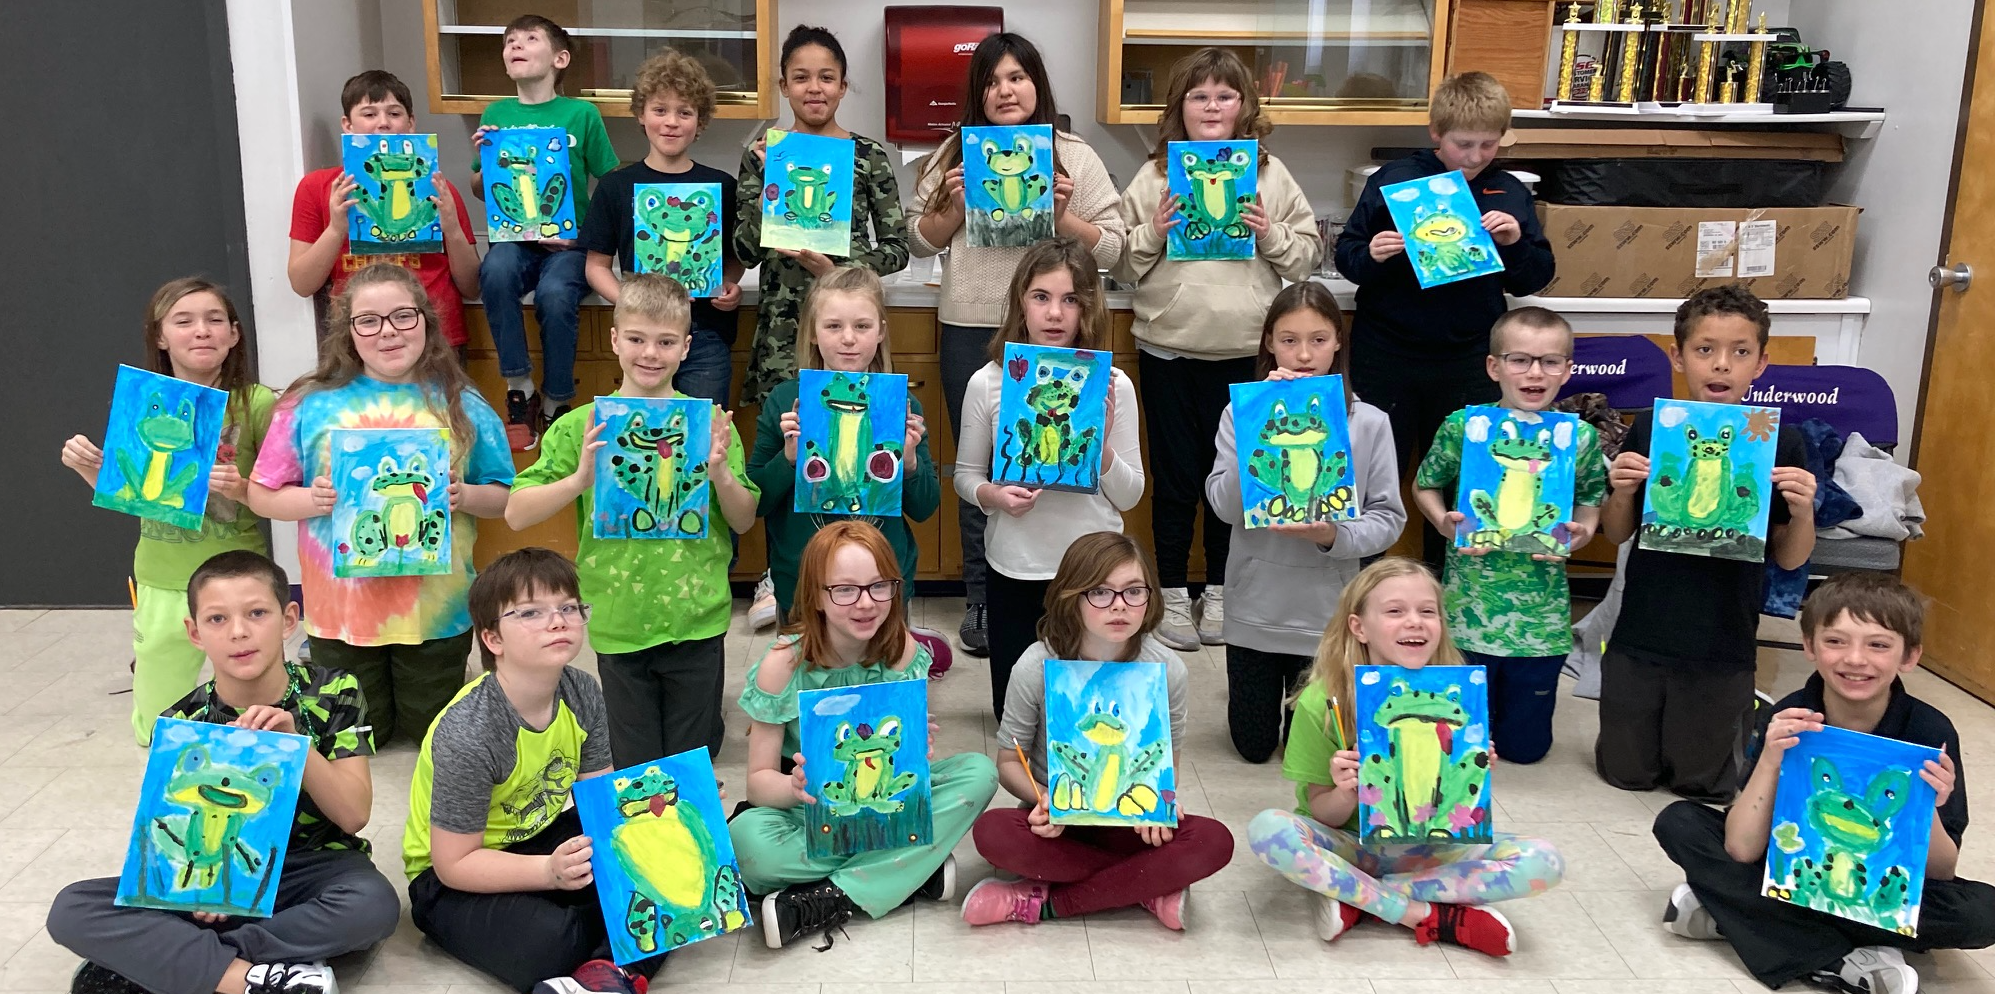 Underwood students create ‘Art from the Heart’